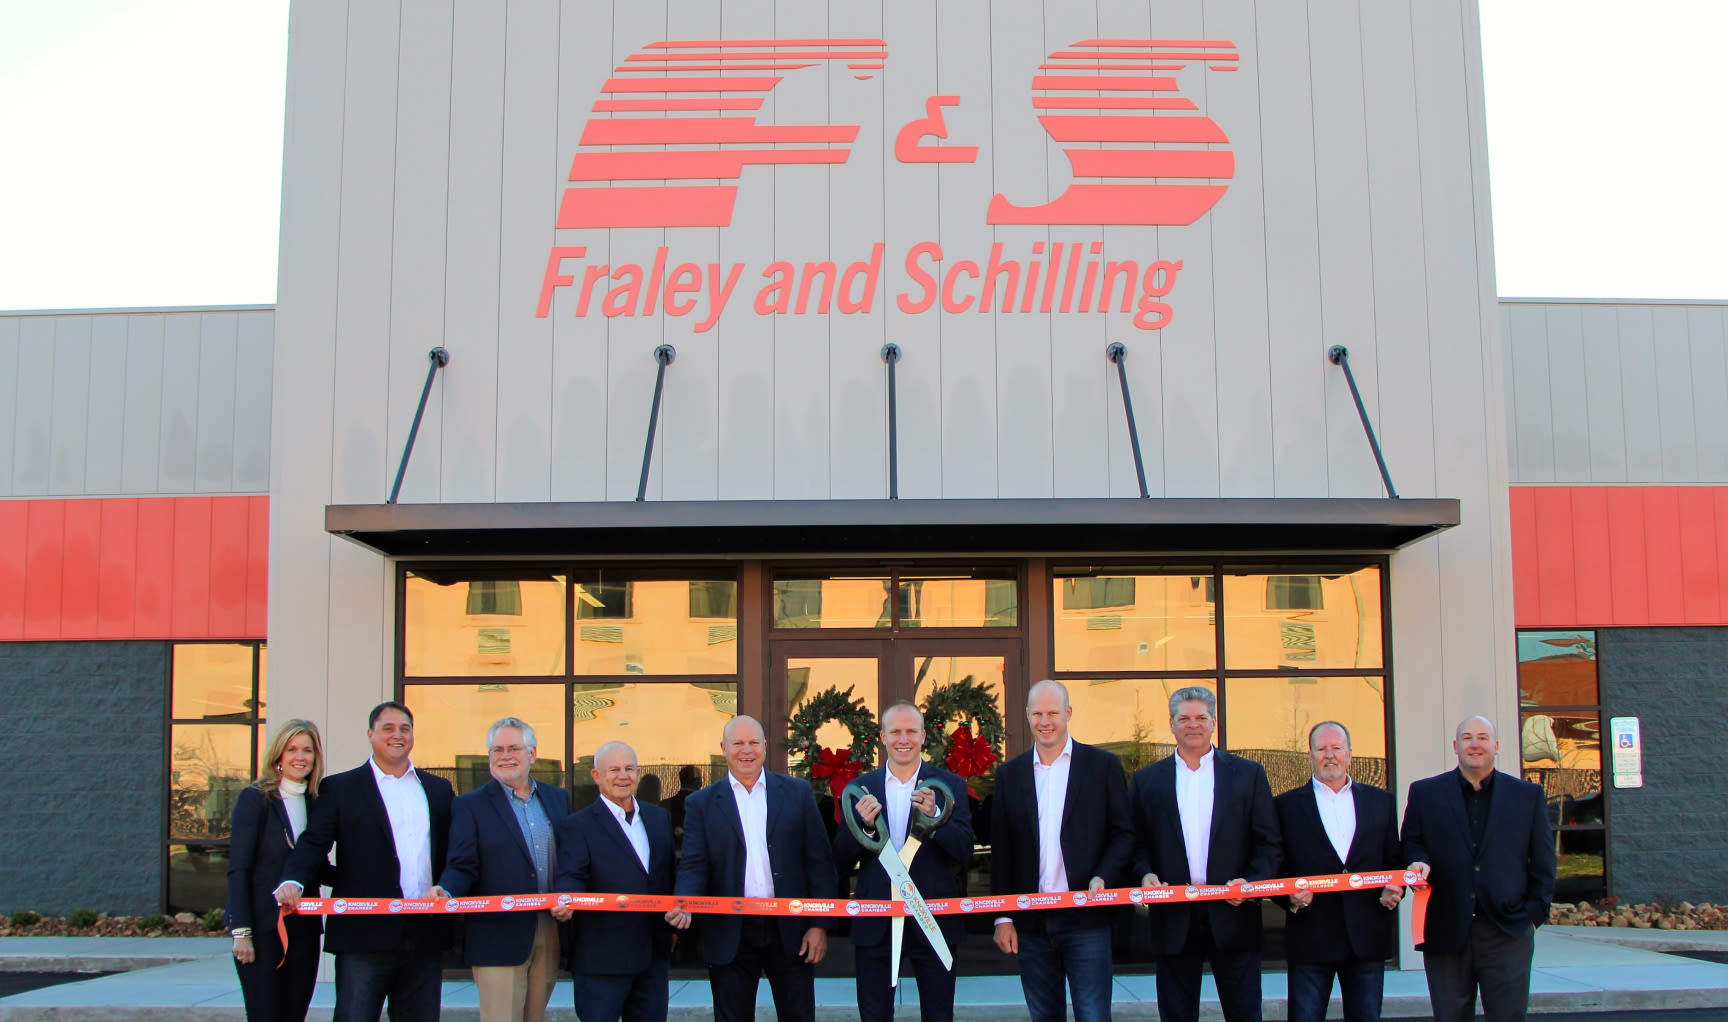 Ribbon cutting ceremony outside of a Fraley & Schilling office building